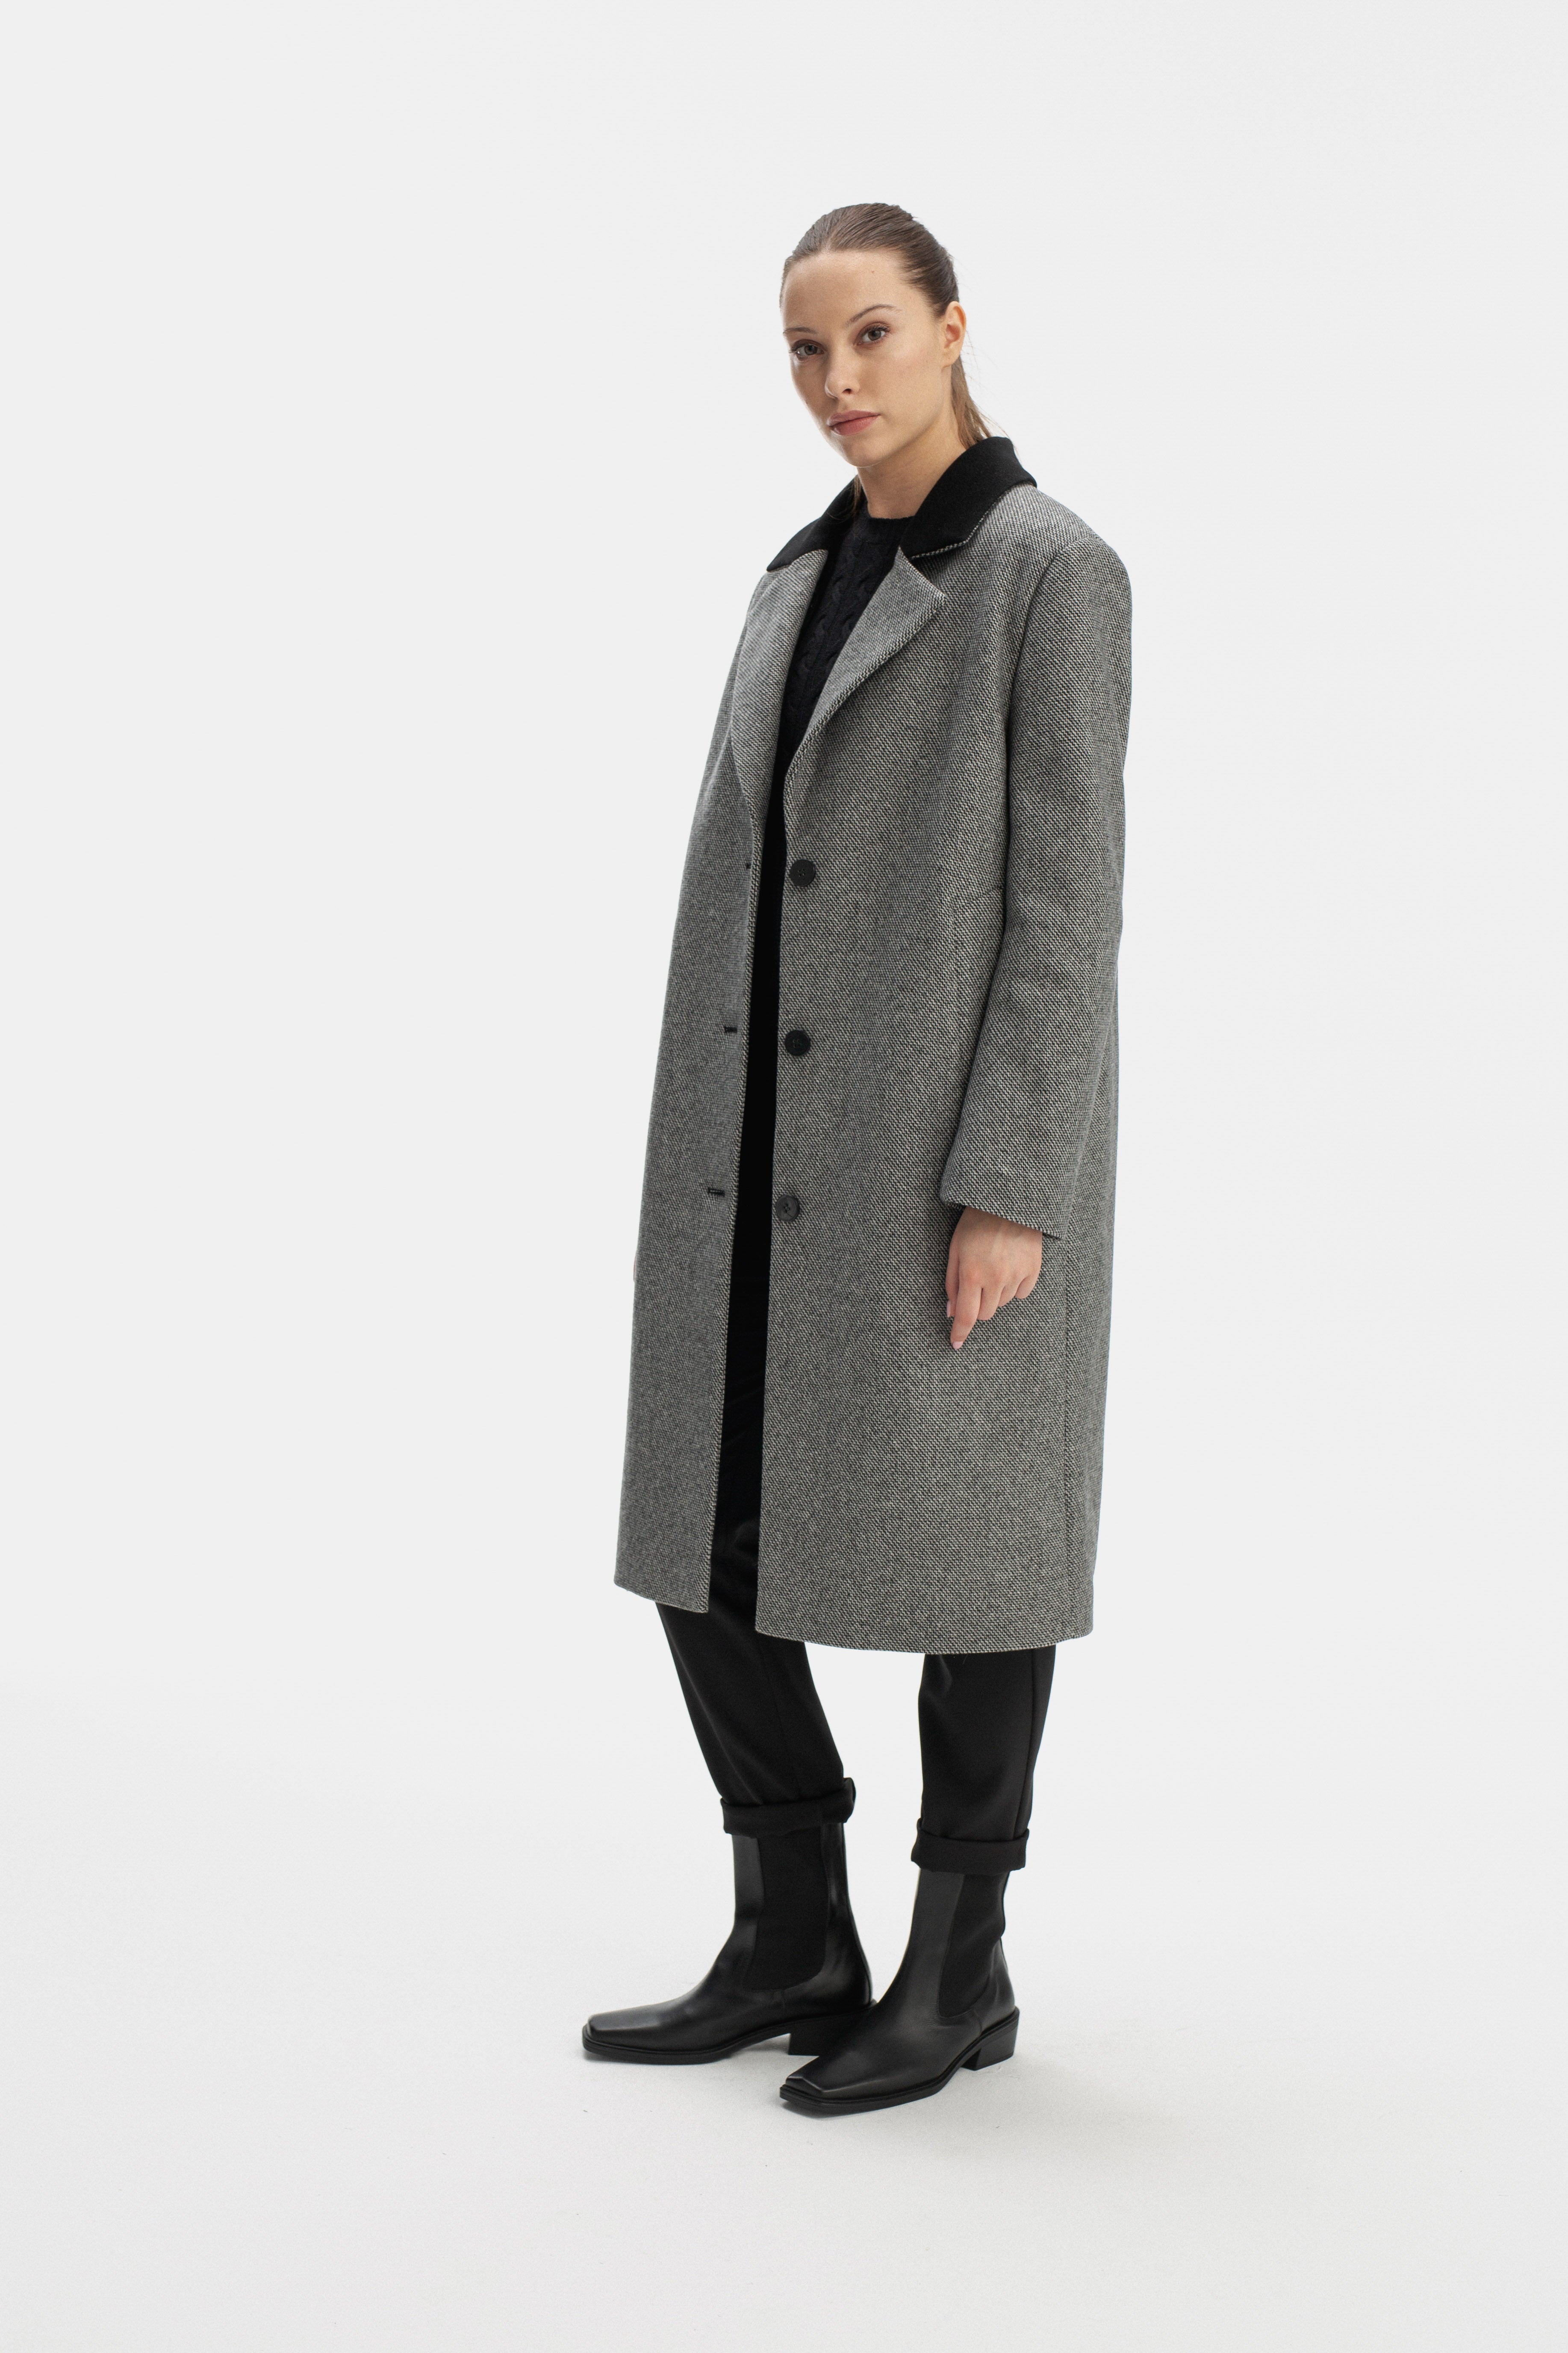 TAILORED GREY COAT WITH BROAD SHOULDERS